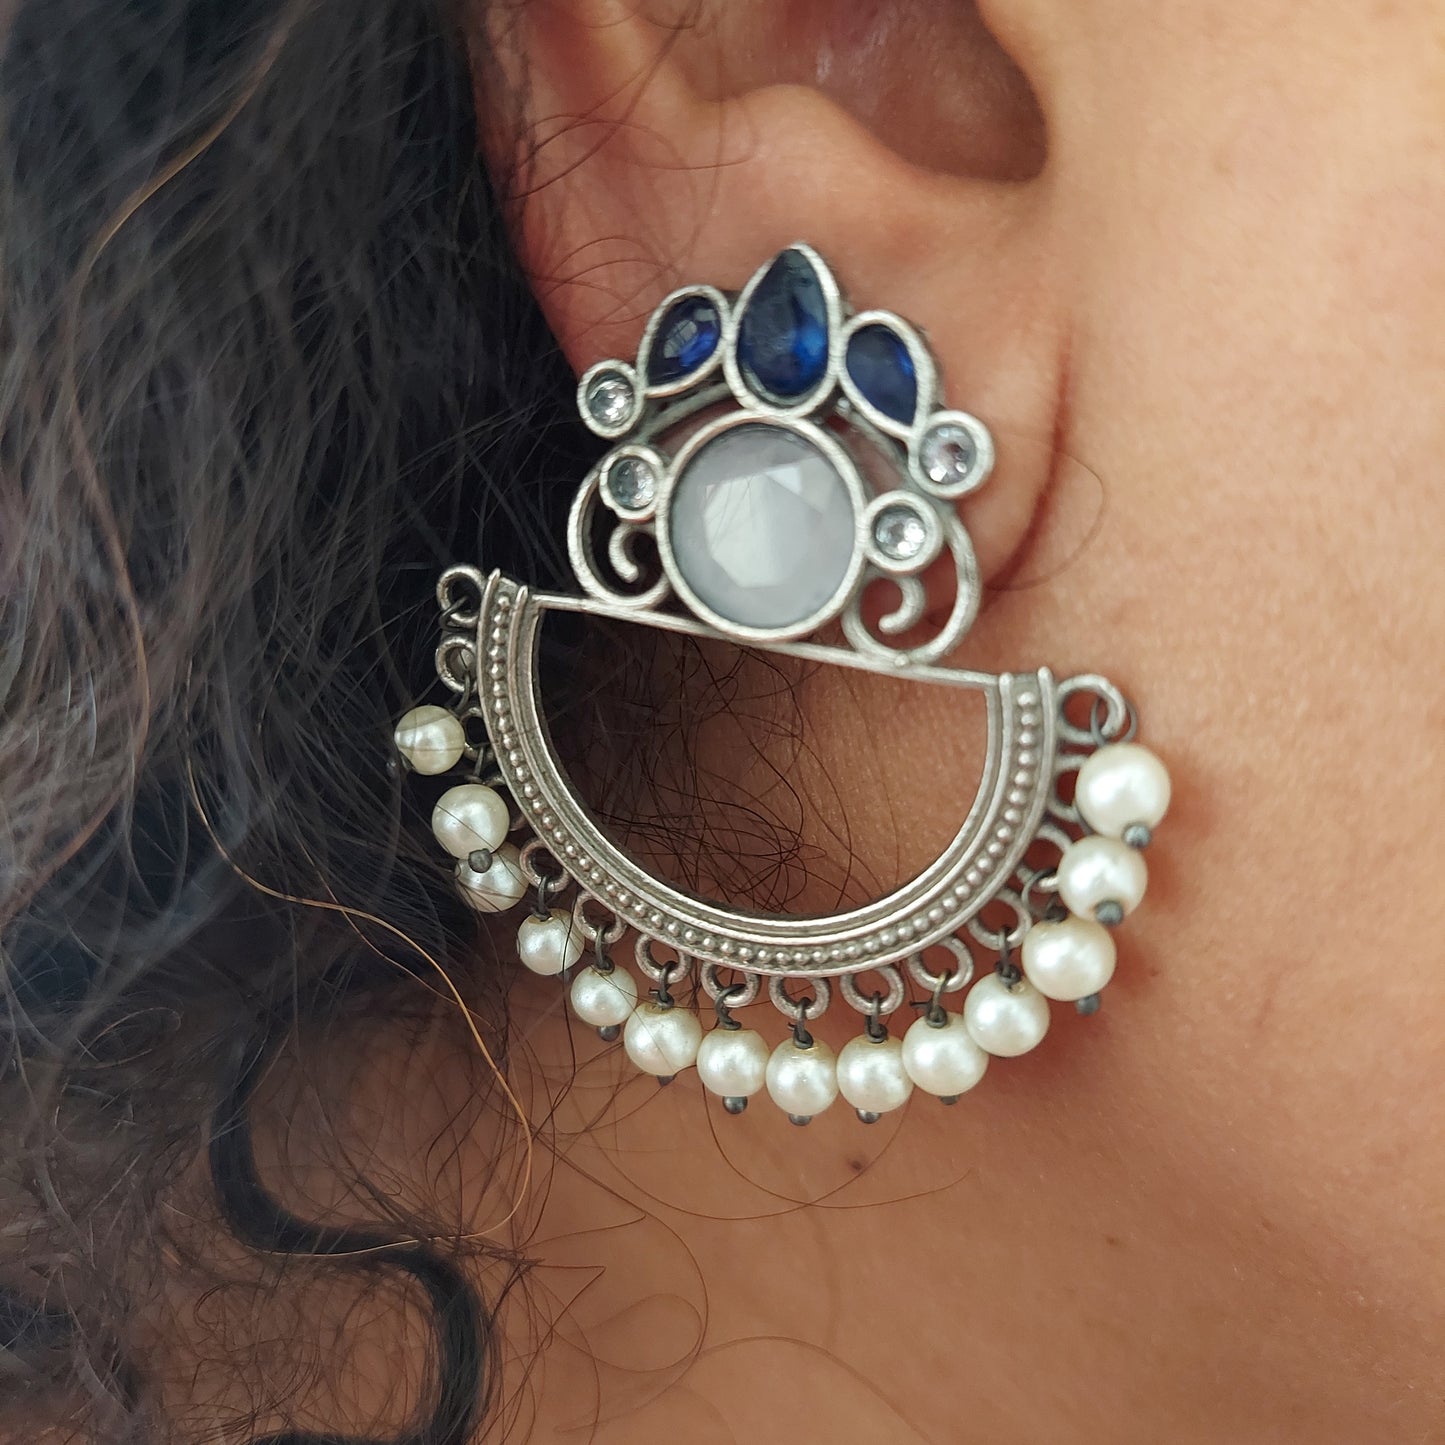 White and Blue Stoned Statement Earrings with Pearl  Danglers